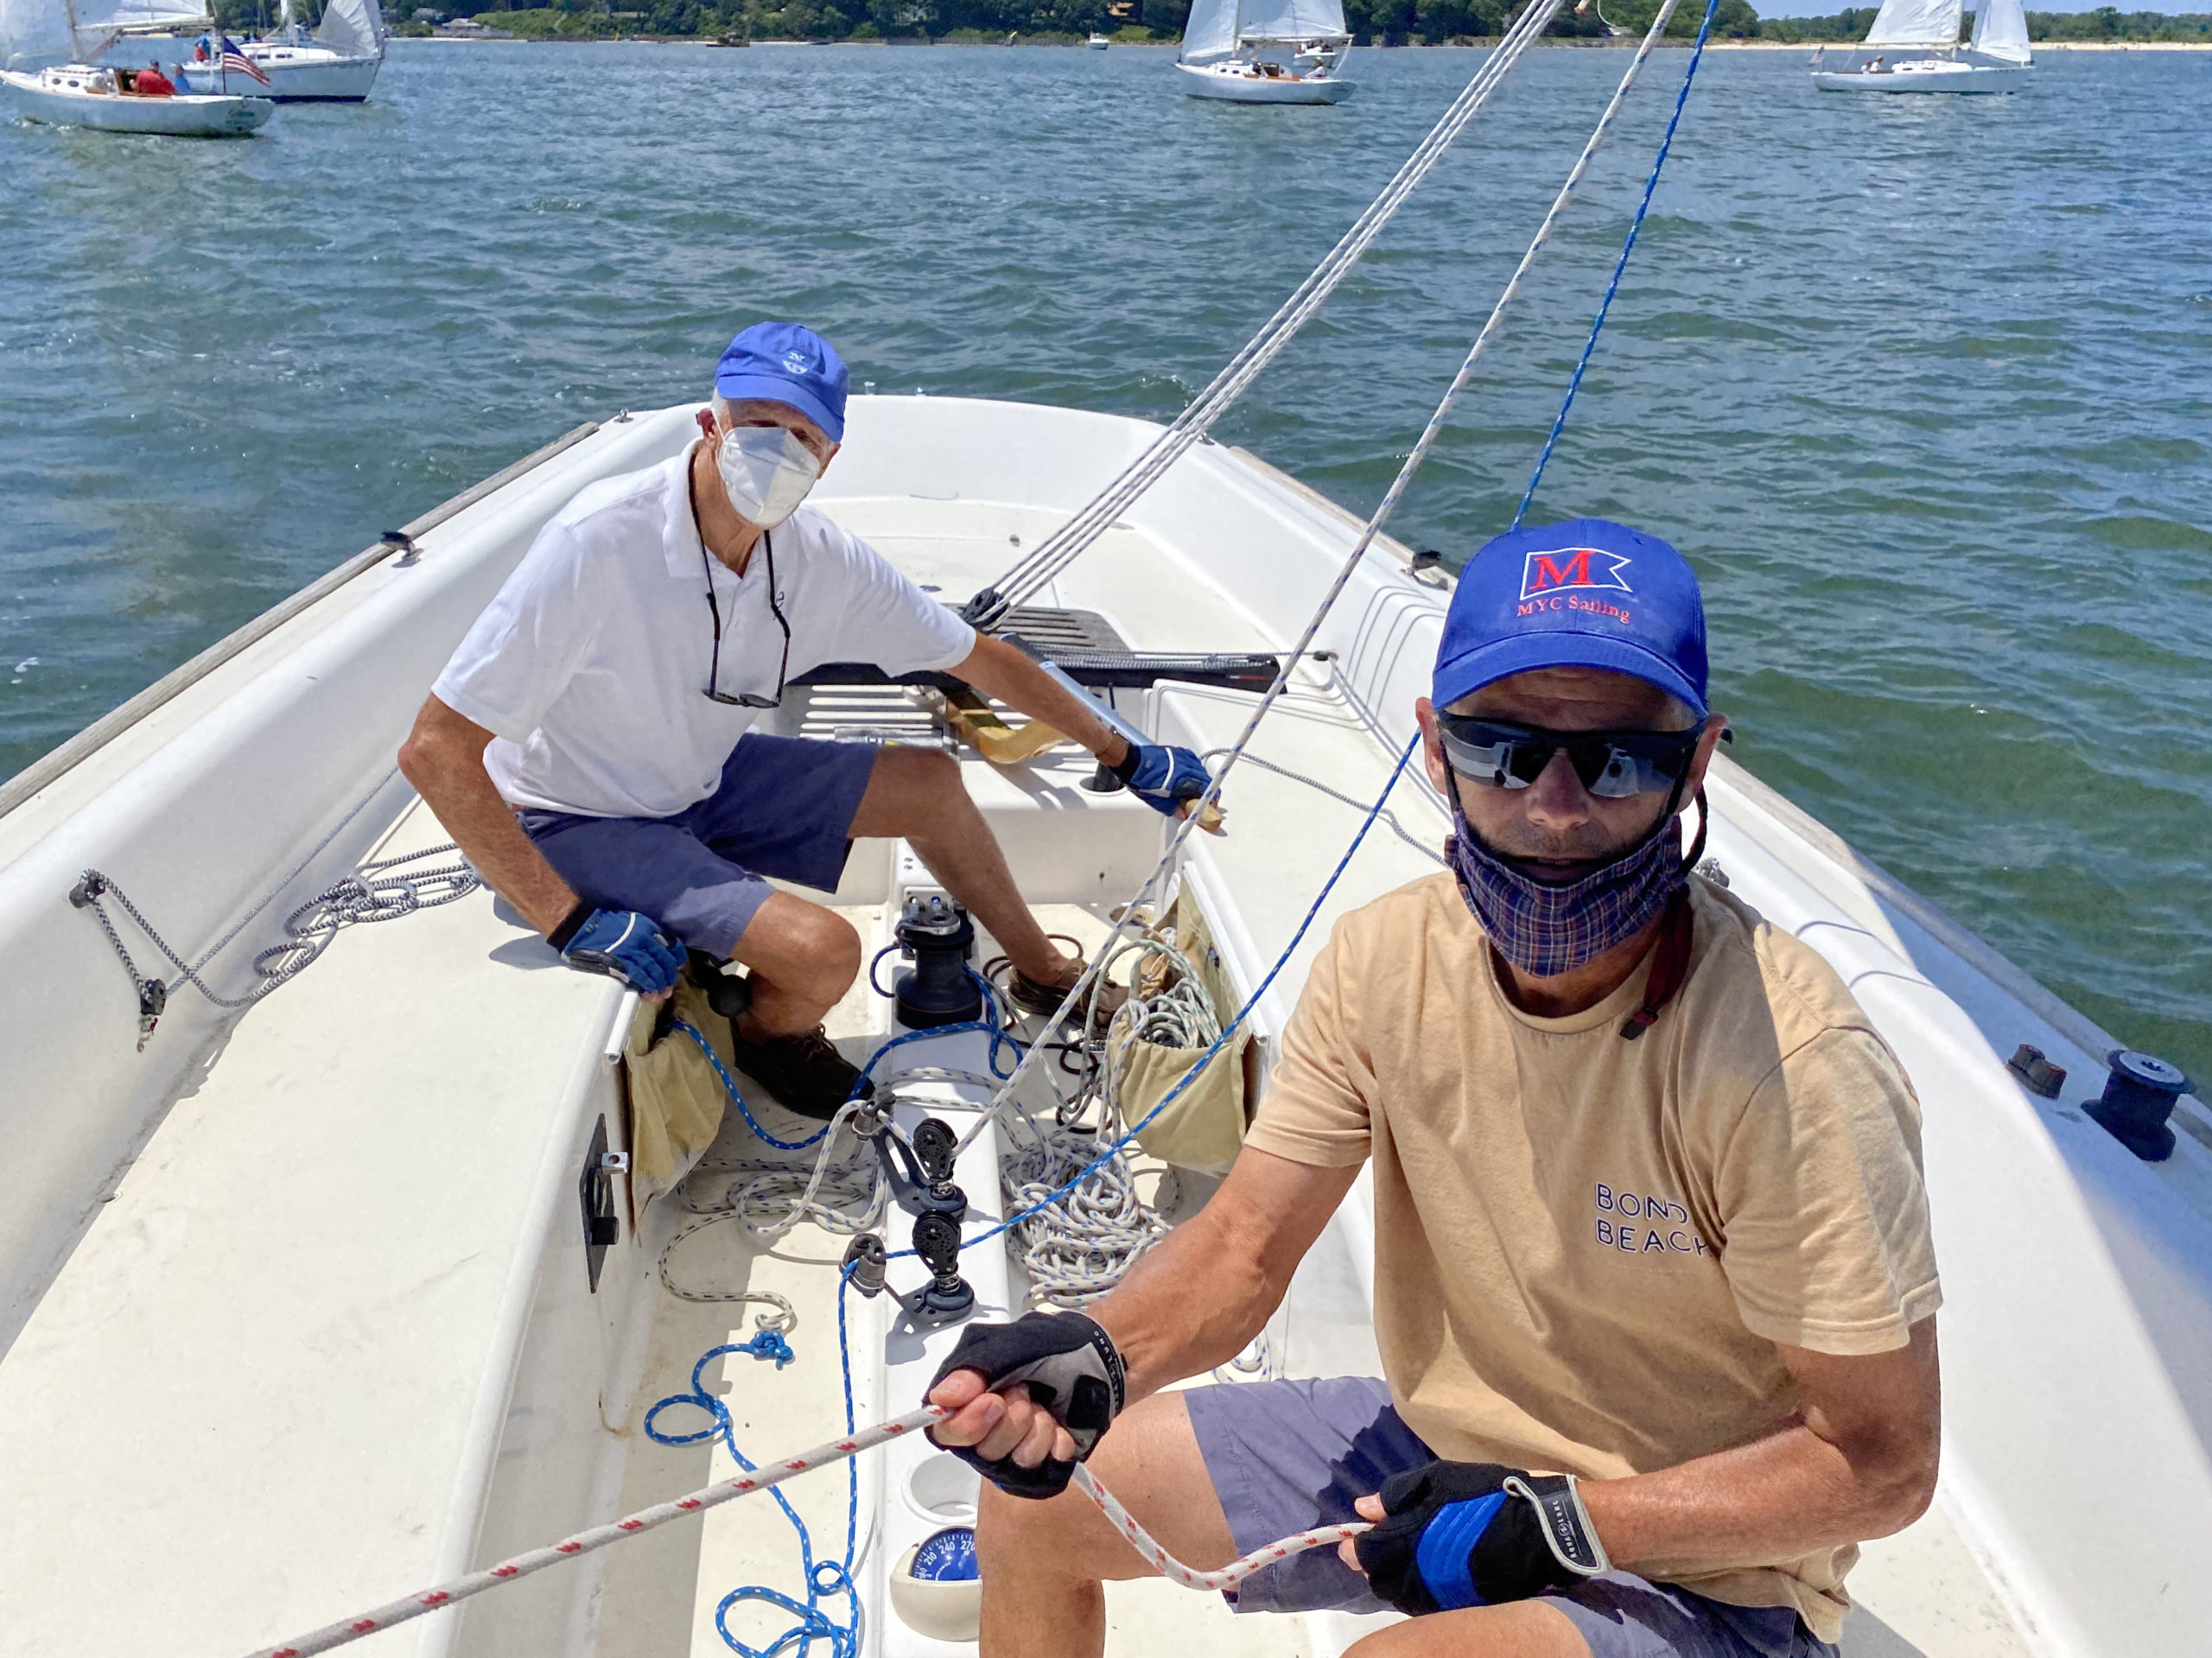 Captain Mark Rickabaugh and jib sheet trimmer Bill Edwards aboard the e-33 yacht, Entropy during the Peconic Bay Sailing Association race on Saturday hosted by the New Suffolk Old Cove Yacht Club.     MICHAEL MELLA